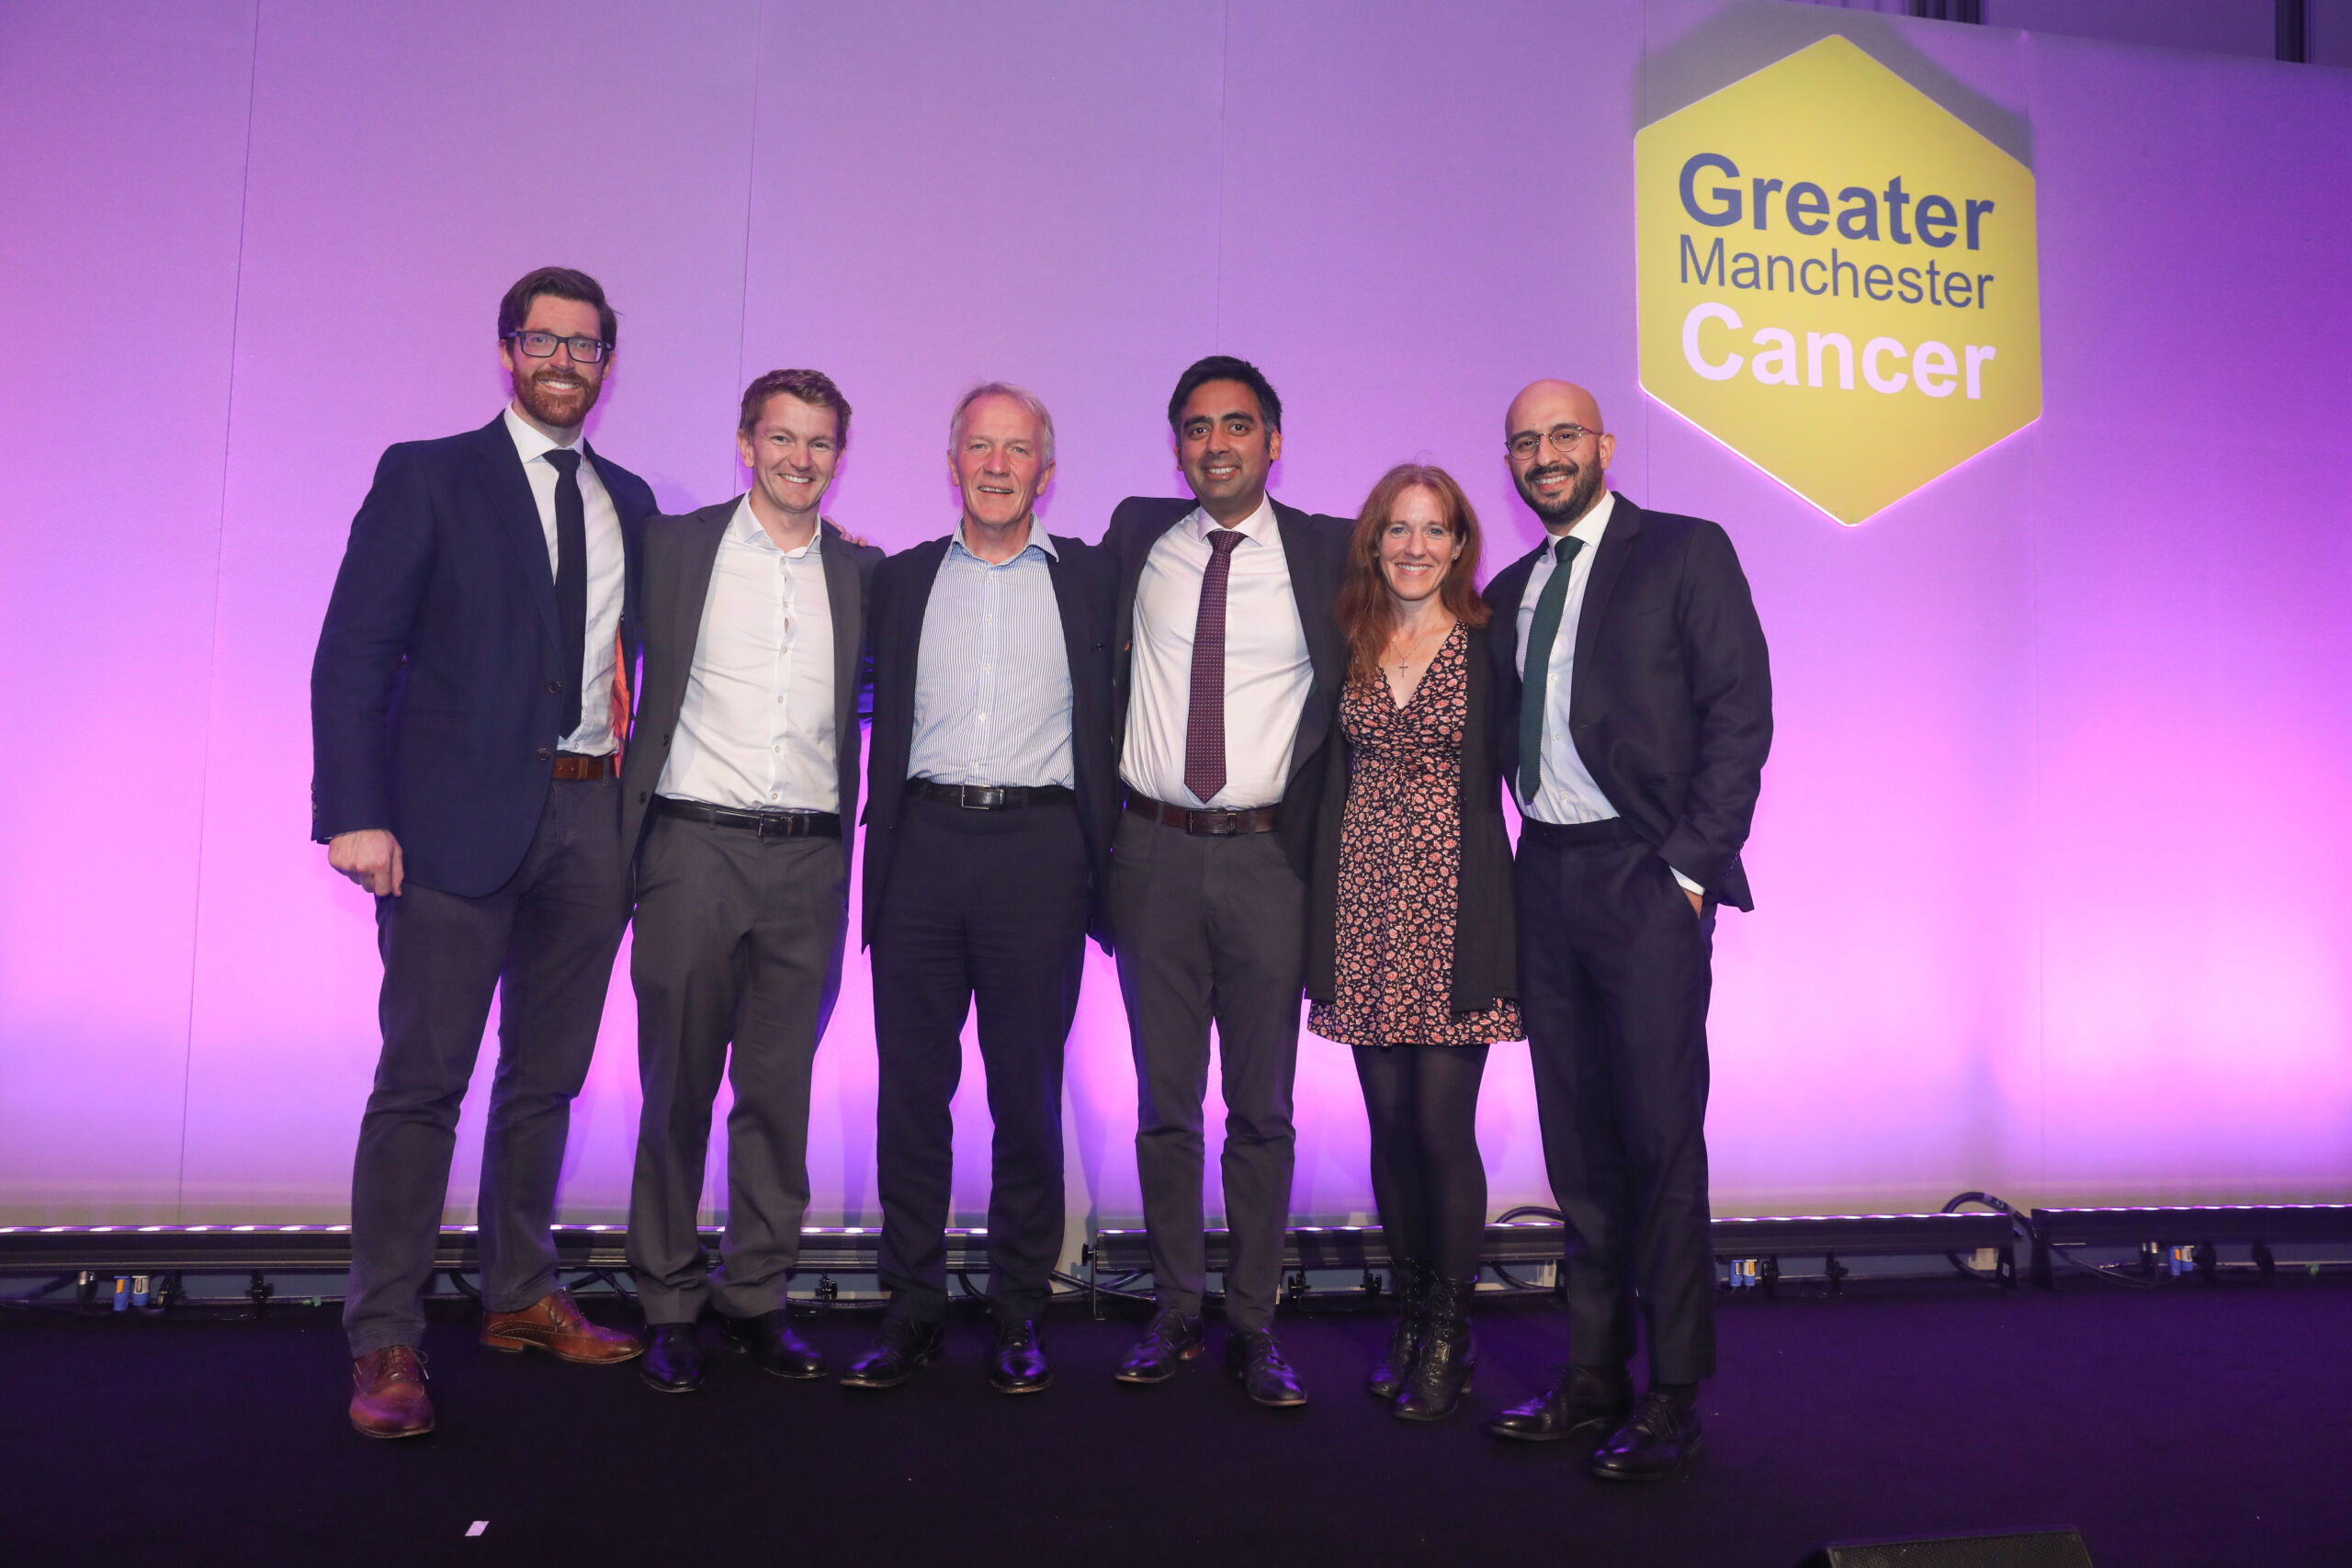 Five men and one woman on stage at the GM Cancer Awards with their arms around each our